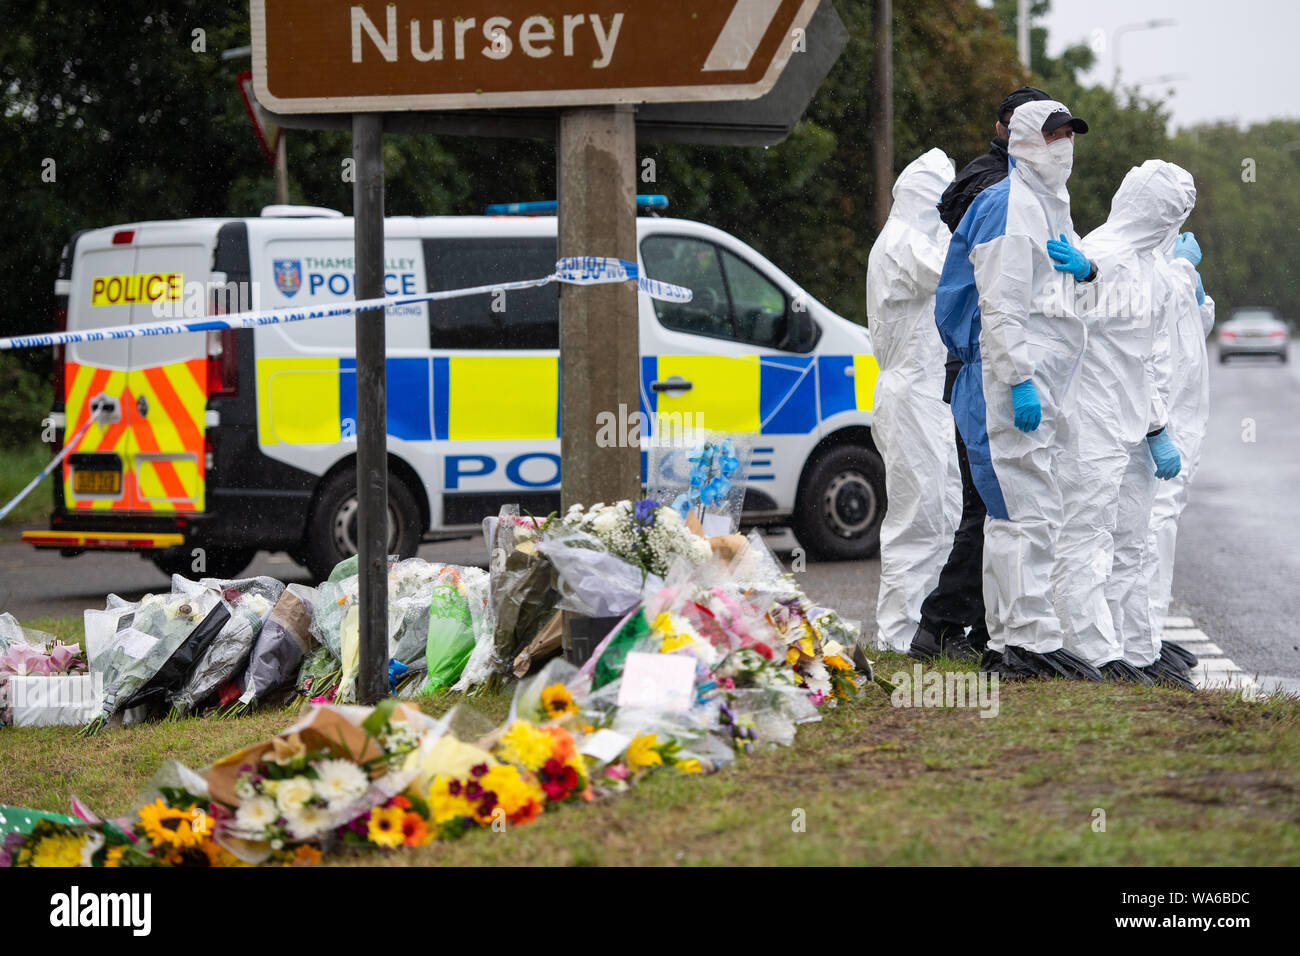 Police officers at the scene in Ufton Lane, Sulhamstead, Berkshire, where Thames Valley Police officer Pc Andrew Harper, 28, died following a 'serious incident' at about 11.30pm on Thursday near the A4 Bath Road, between Reading and Newbury, at the village of Sulhamstead in Berkshire. Stock Photo